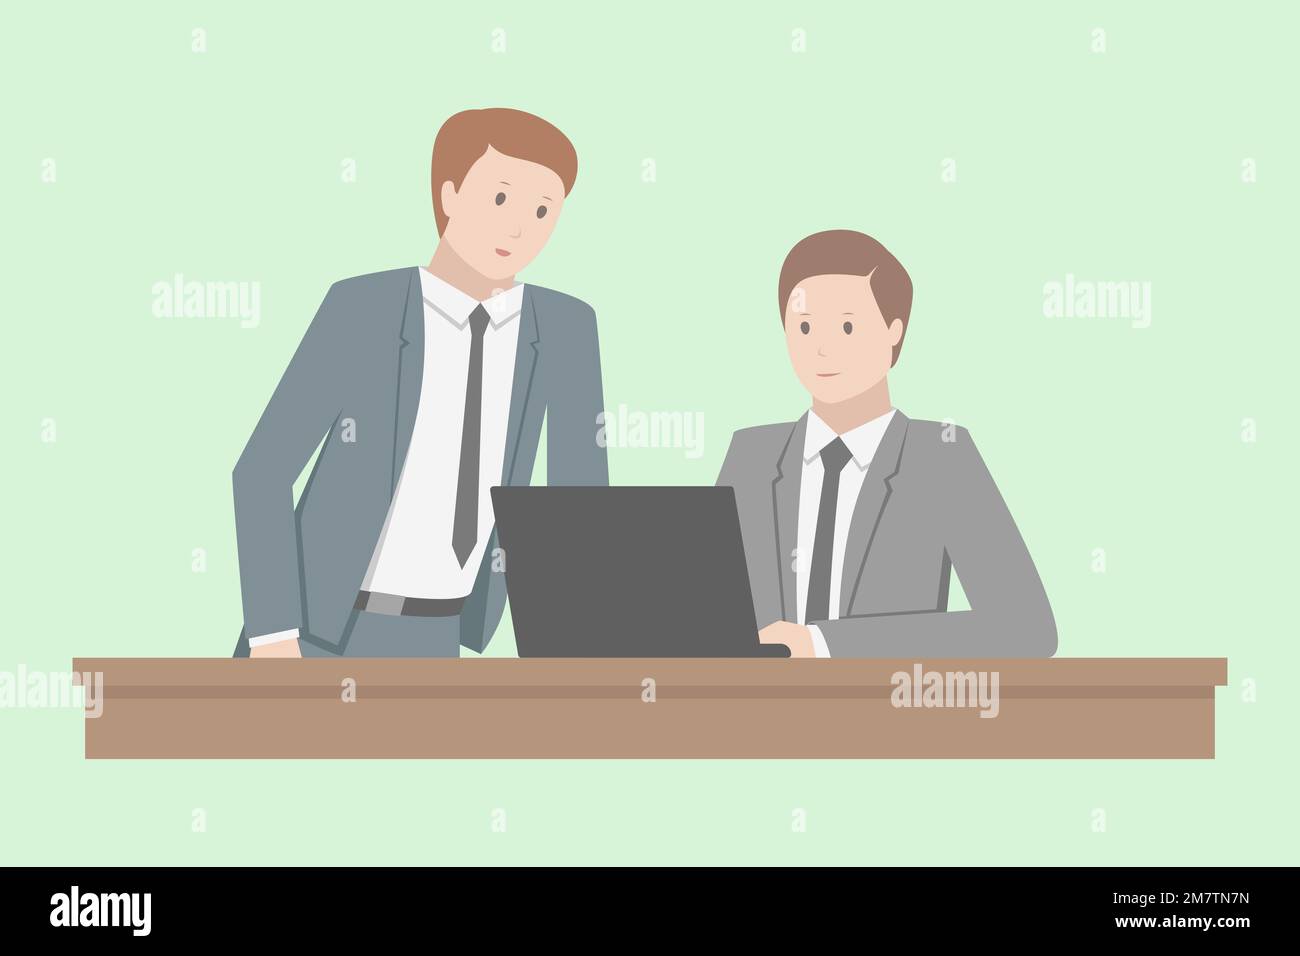 Two colleagues with laptop. White collars. Vector illustration. Stock Vector